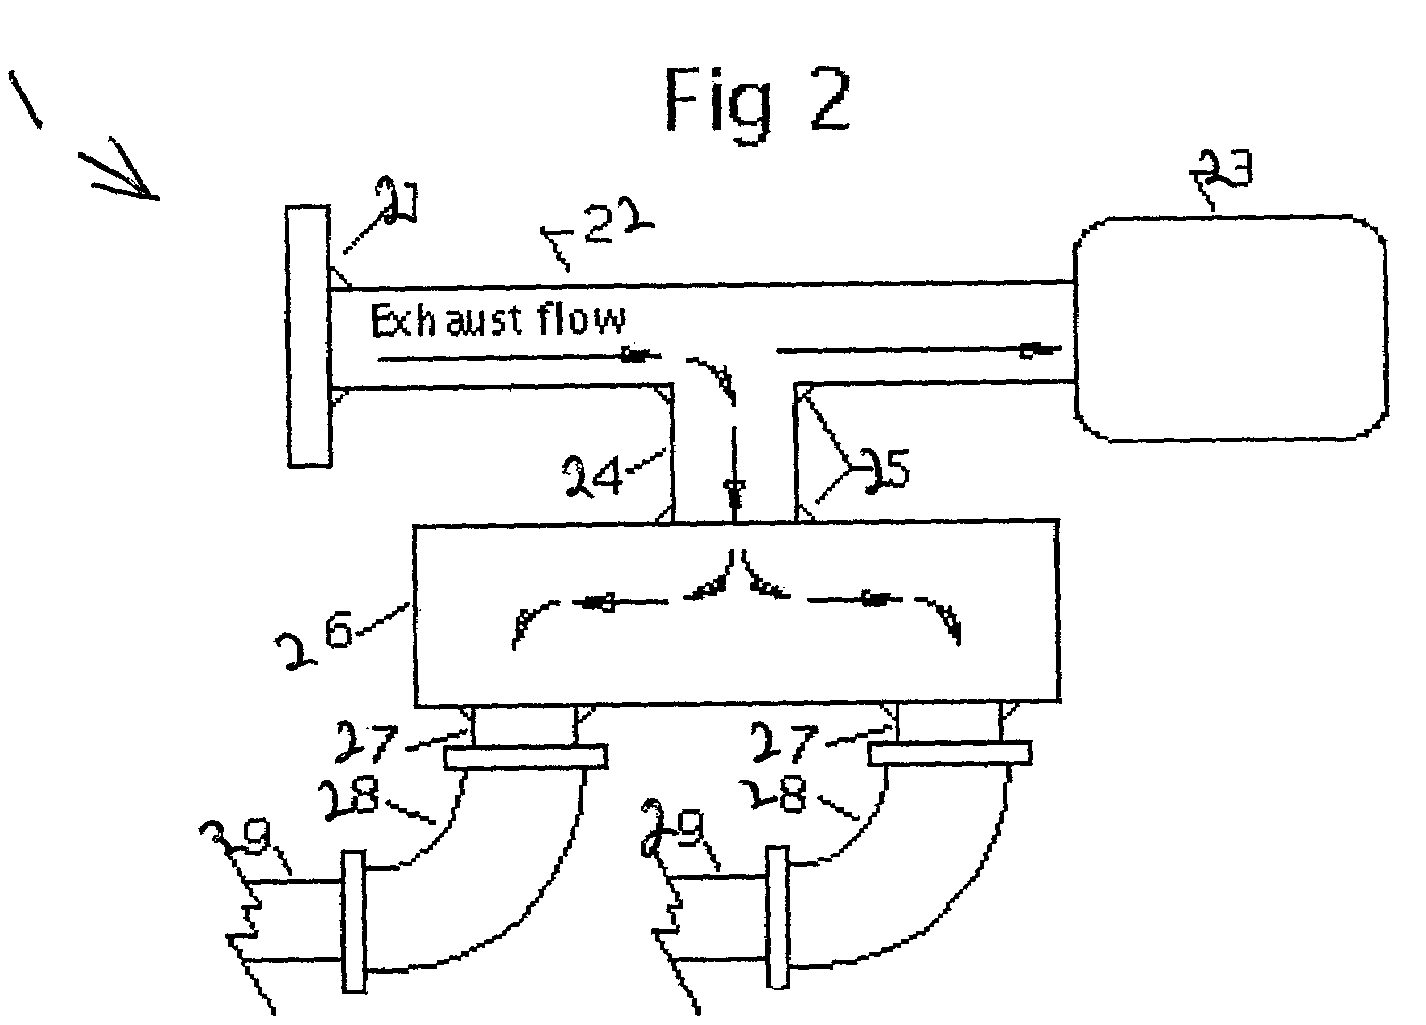 Method and apparatus for using pressurized exhaust gases to control rodents